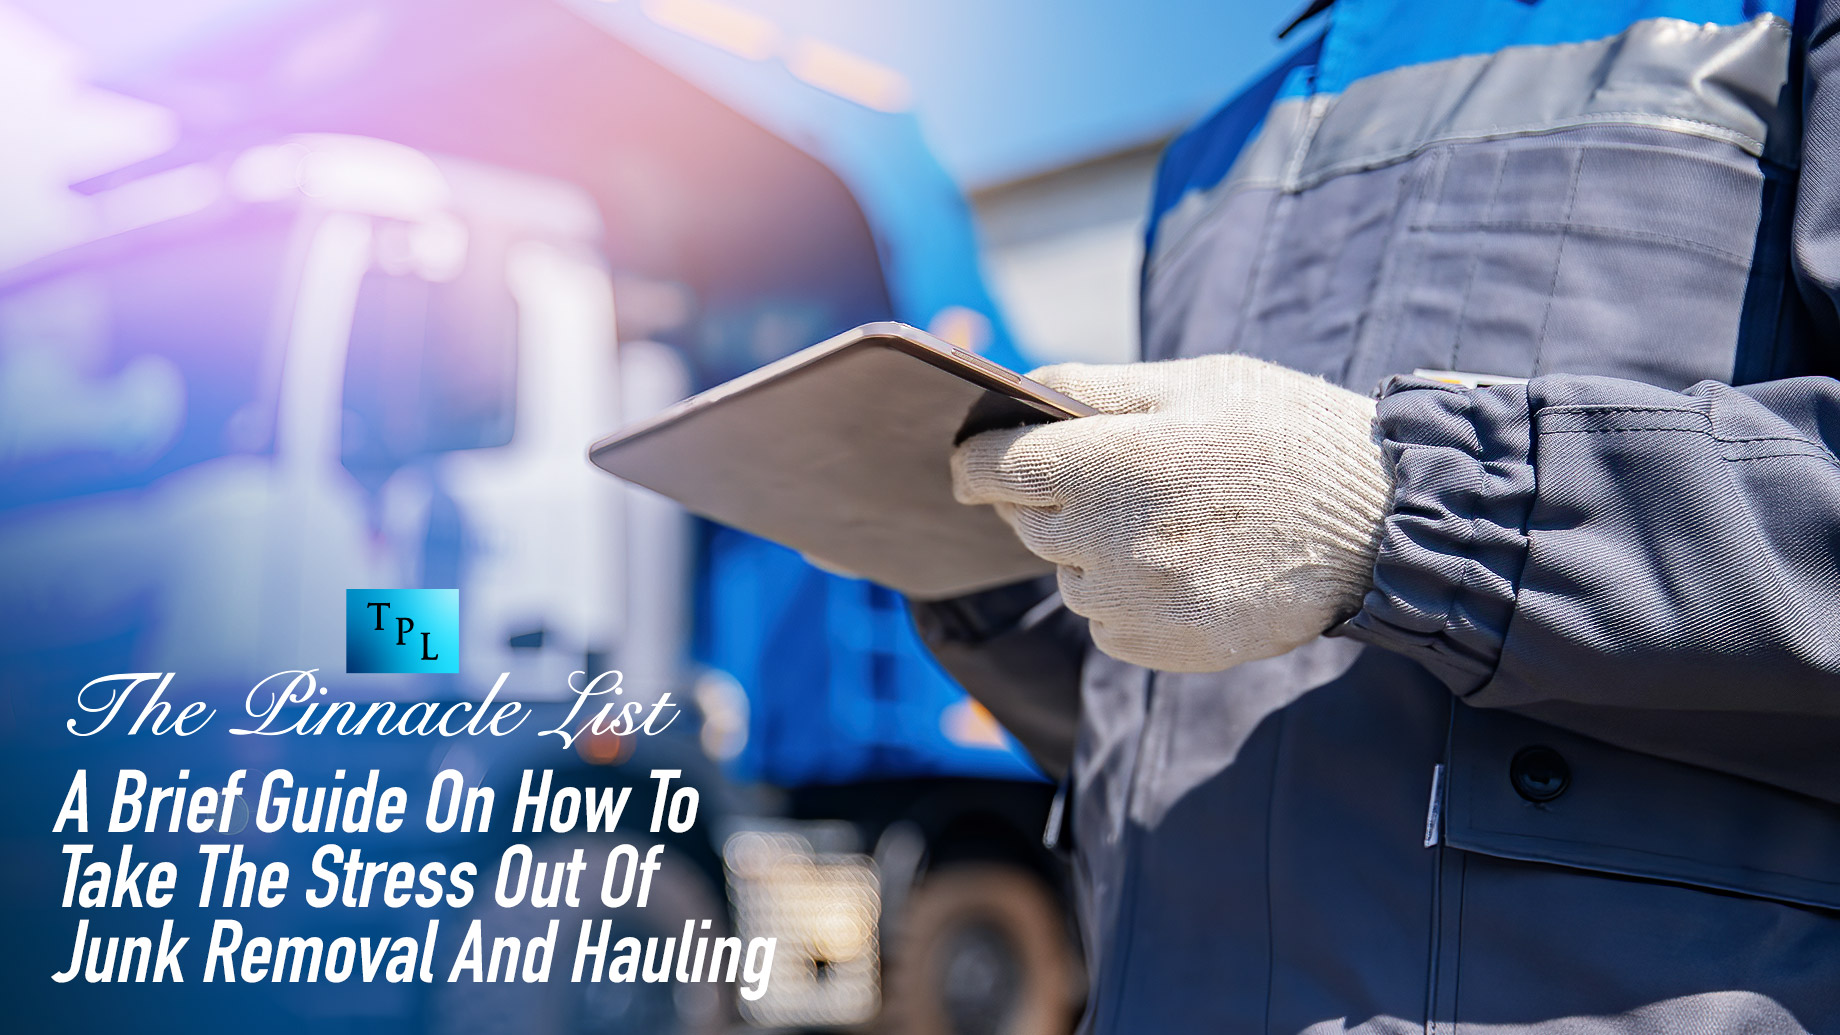 A Brief Guide On How To Take The Stress Out Of Junk Removal And Hauling